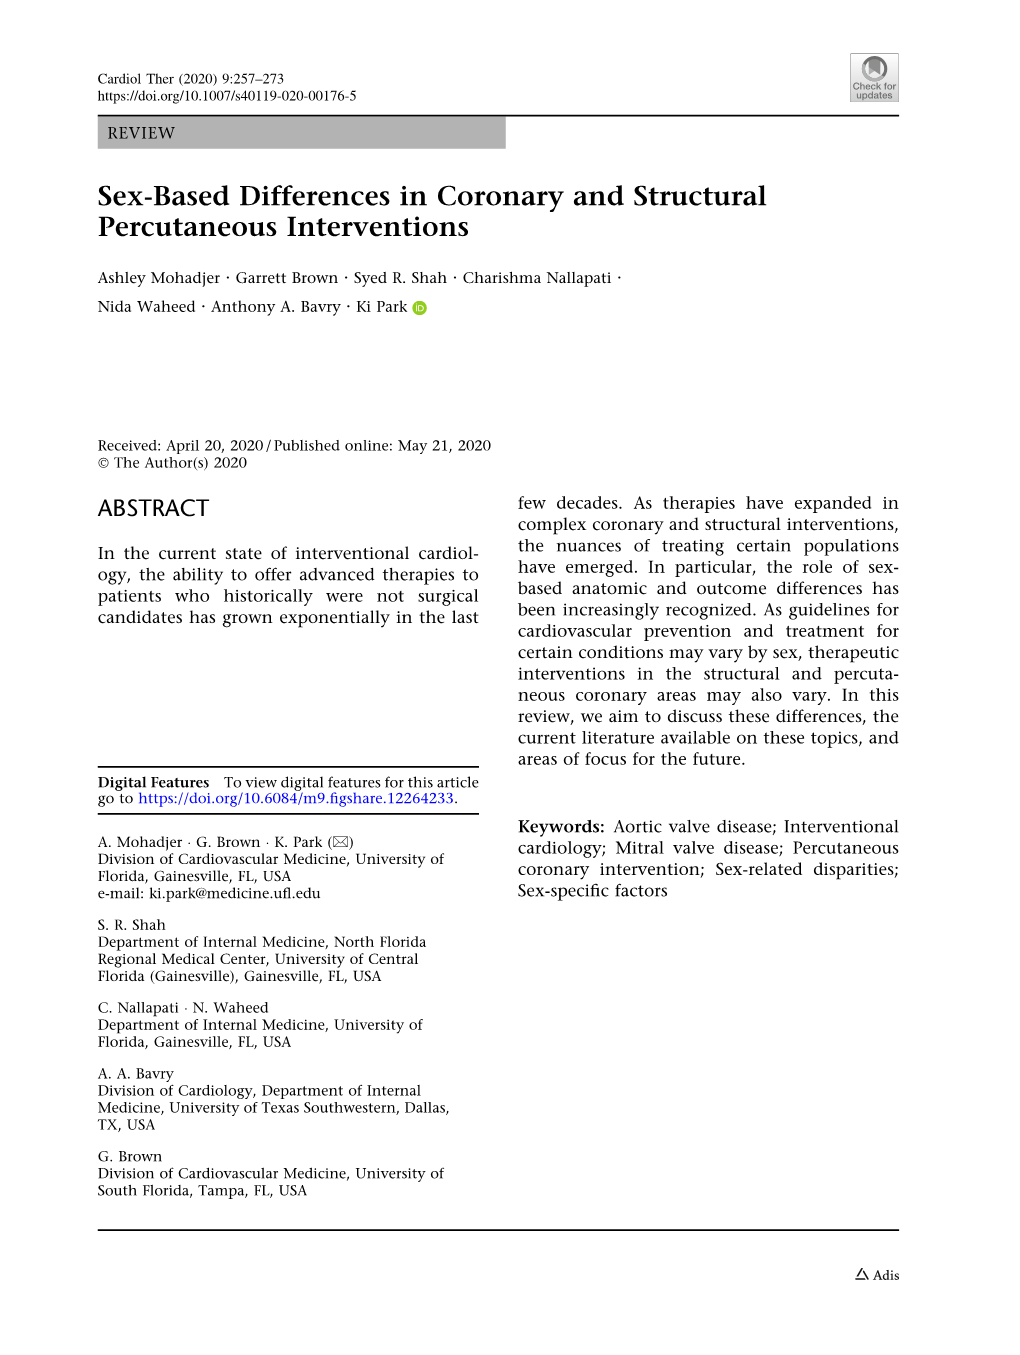 Sex-Based Differences in Coronary and Structural Percutaneous Interventions